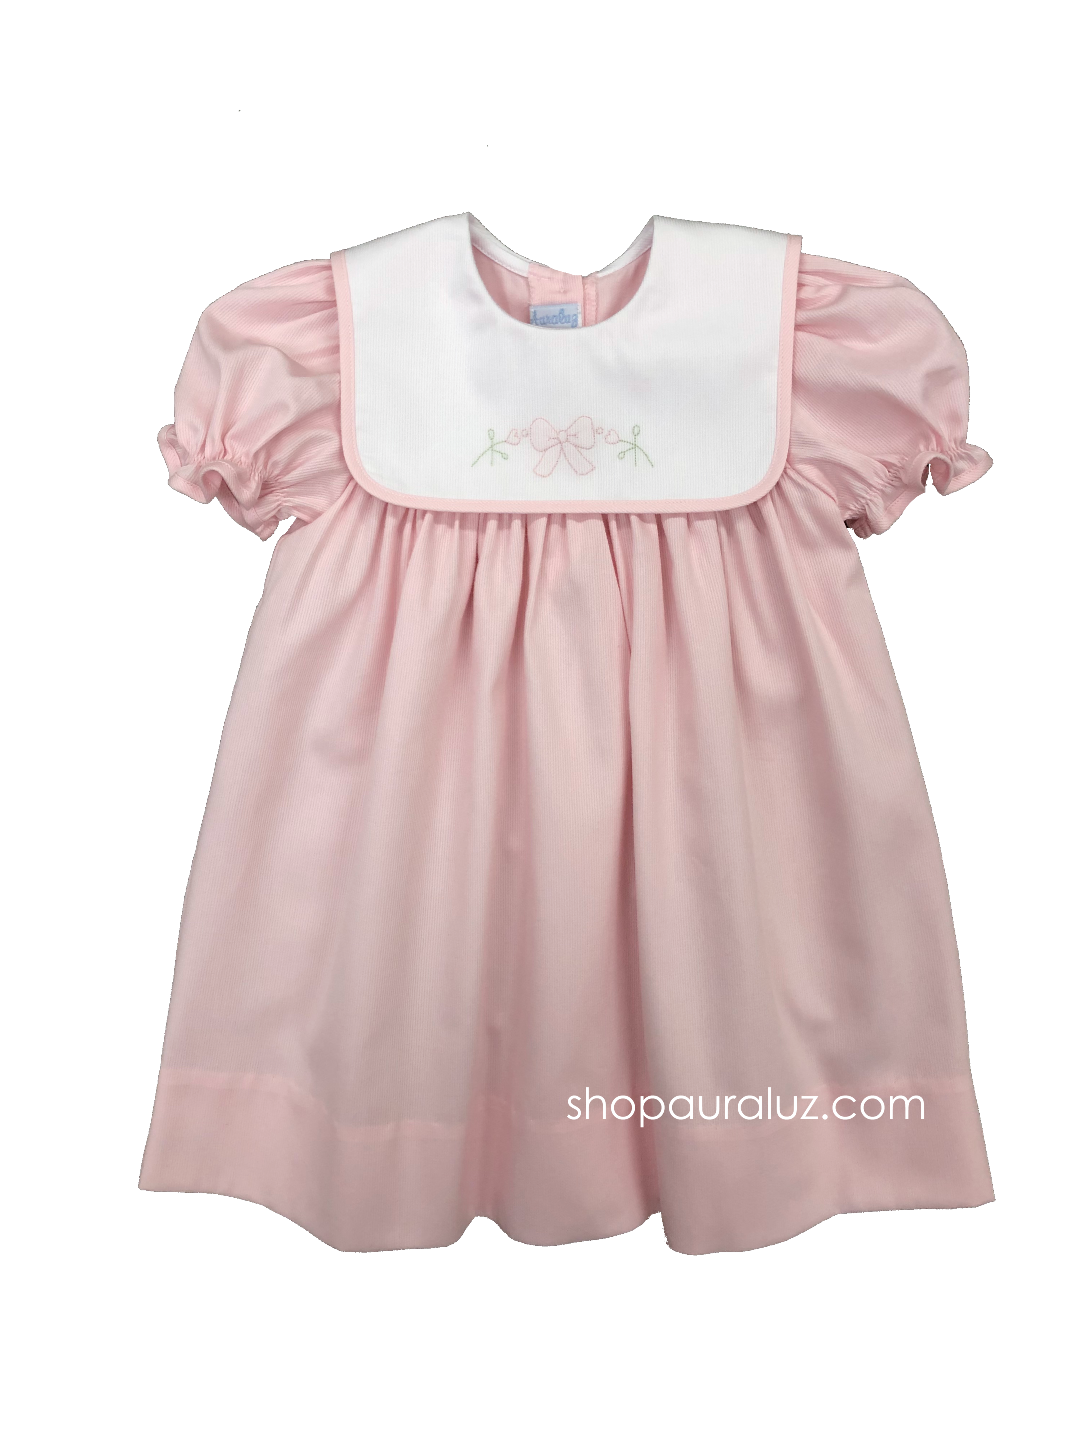 Auraluz Pique Dress..Pink with white square collar and embroidered bow